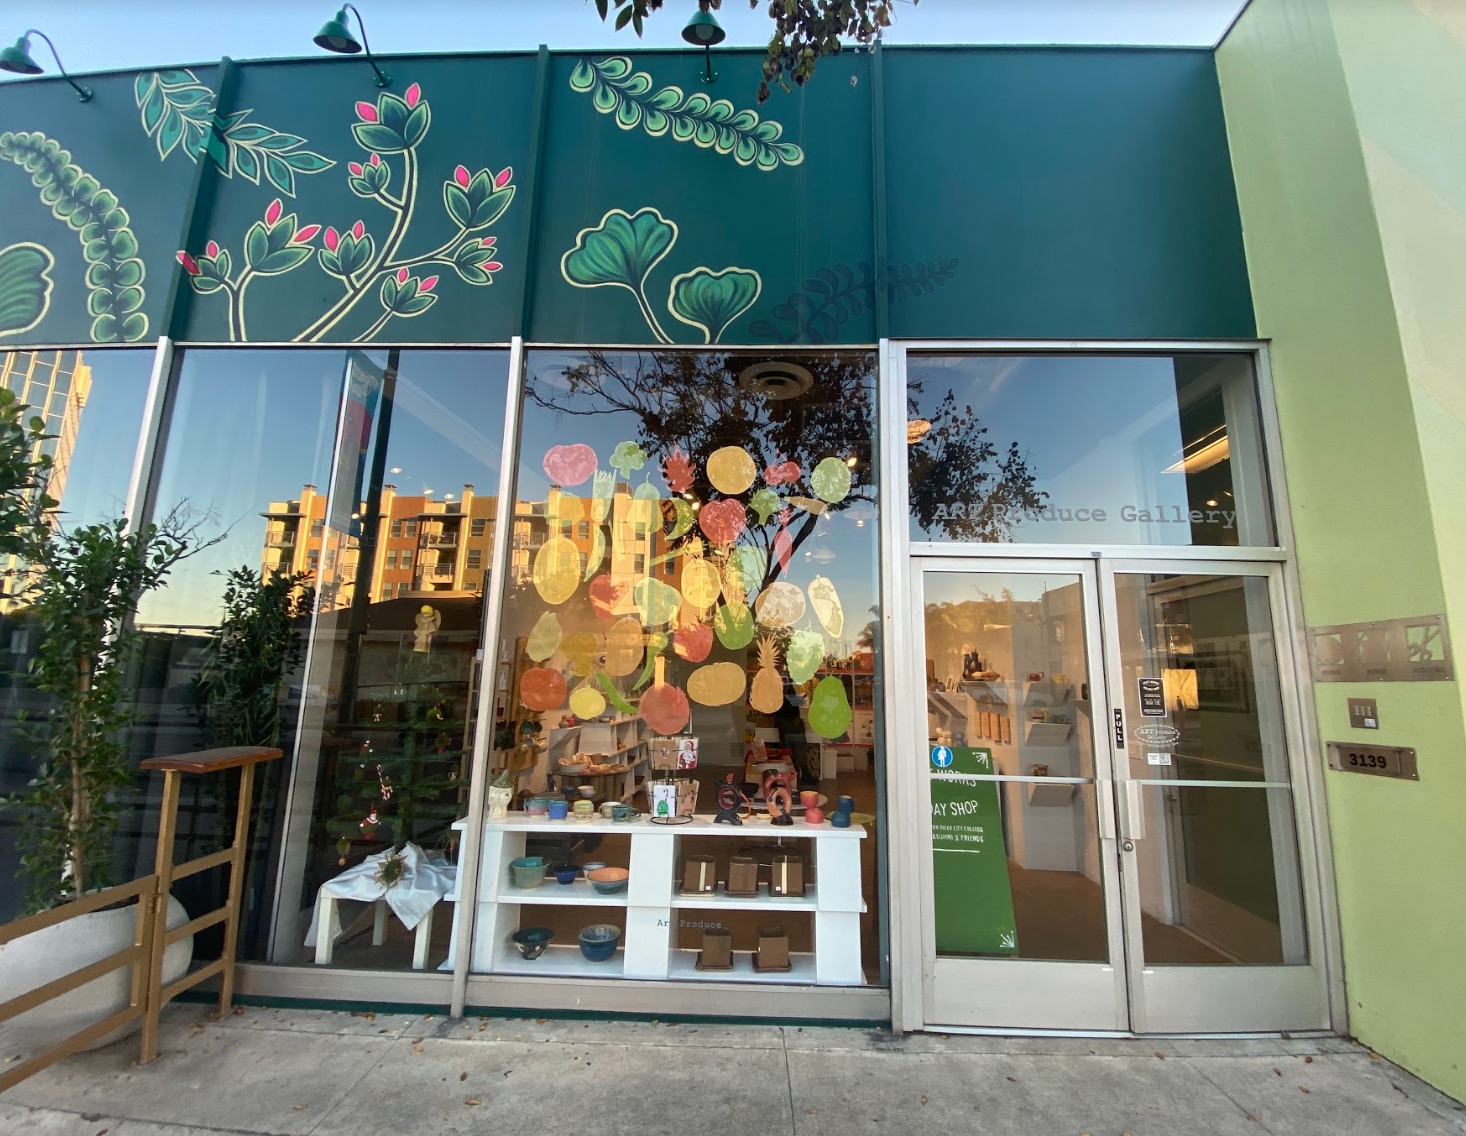 Exterior of Art Produce art gallery in North Park featuring large glass windows and plant murals on the walls